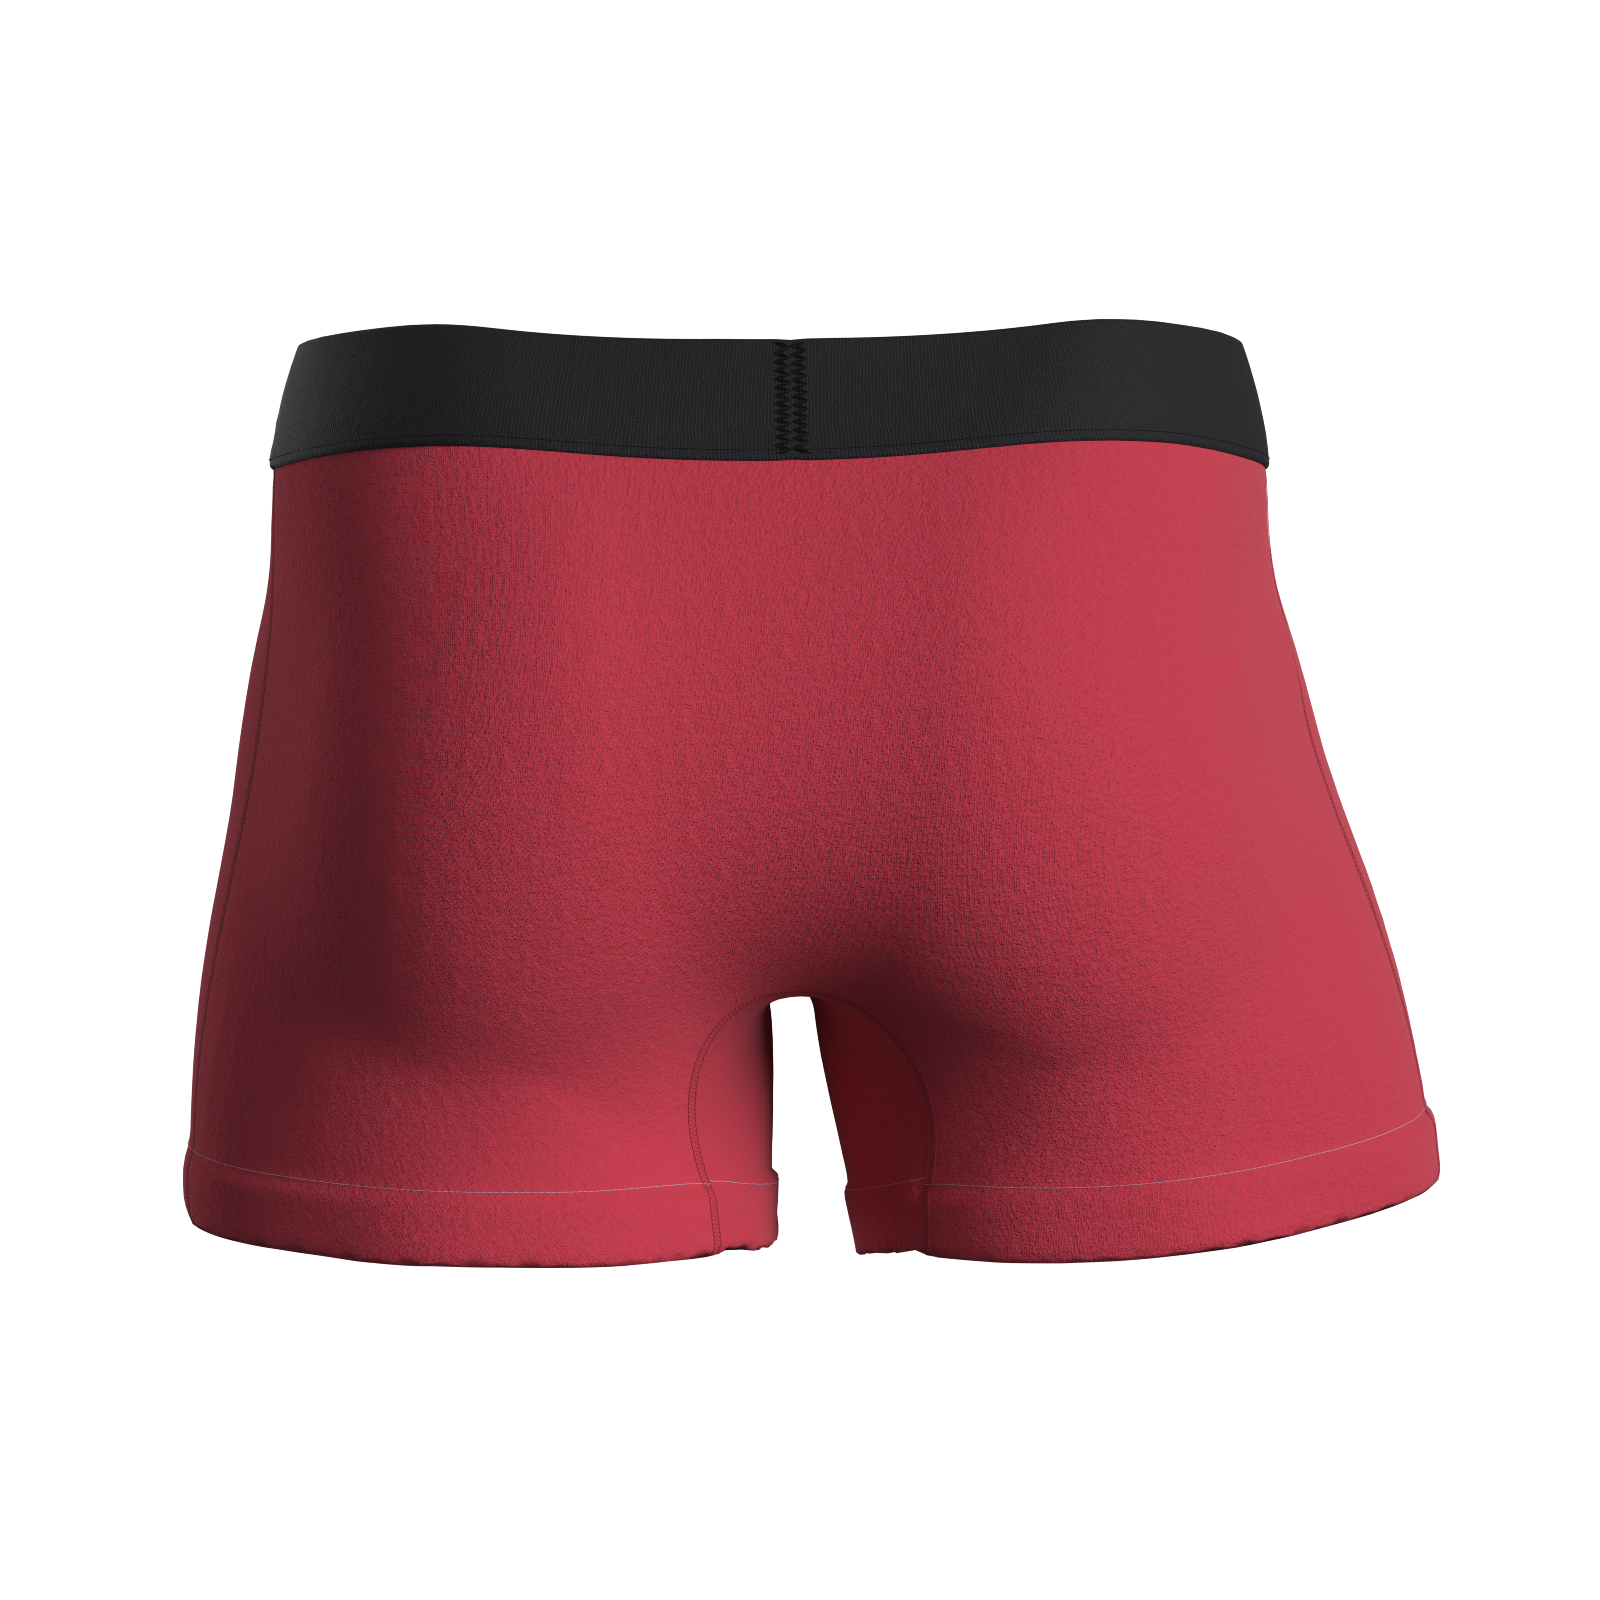 Well Red boxer briefs. Manley Barrier Technology that stops the pee spot. Feel manly in Manley. Stop the Pee Spot.  